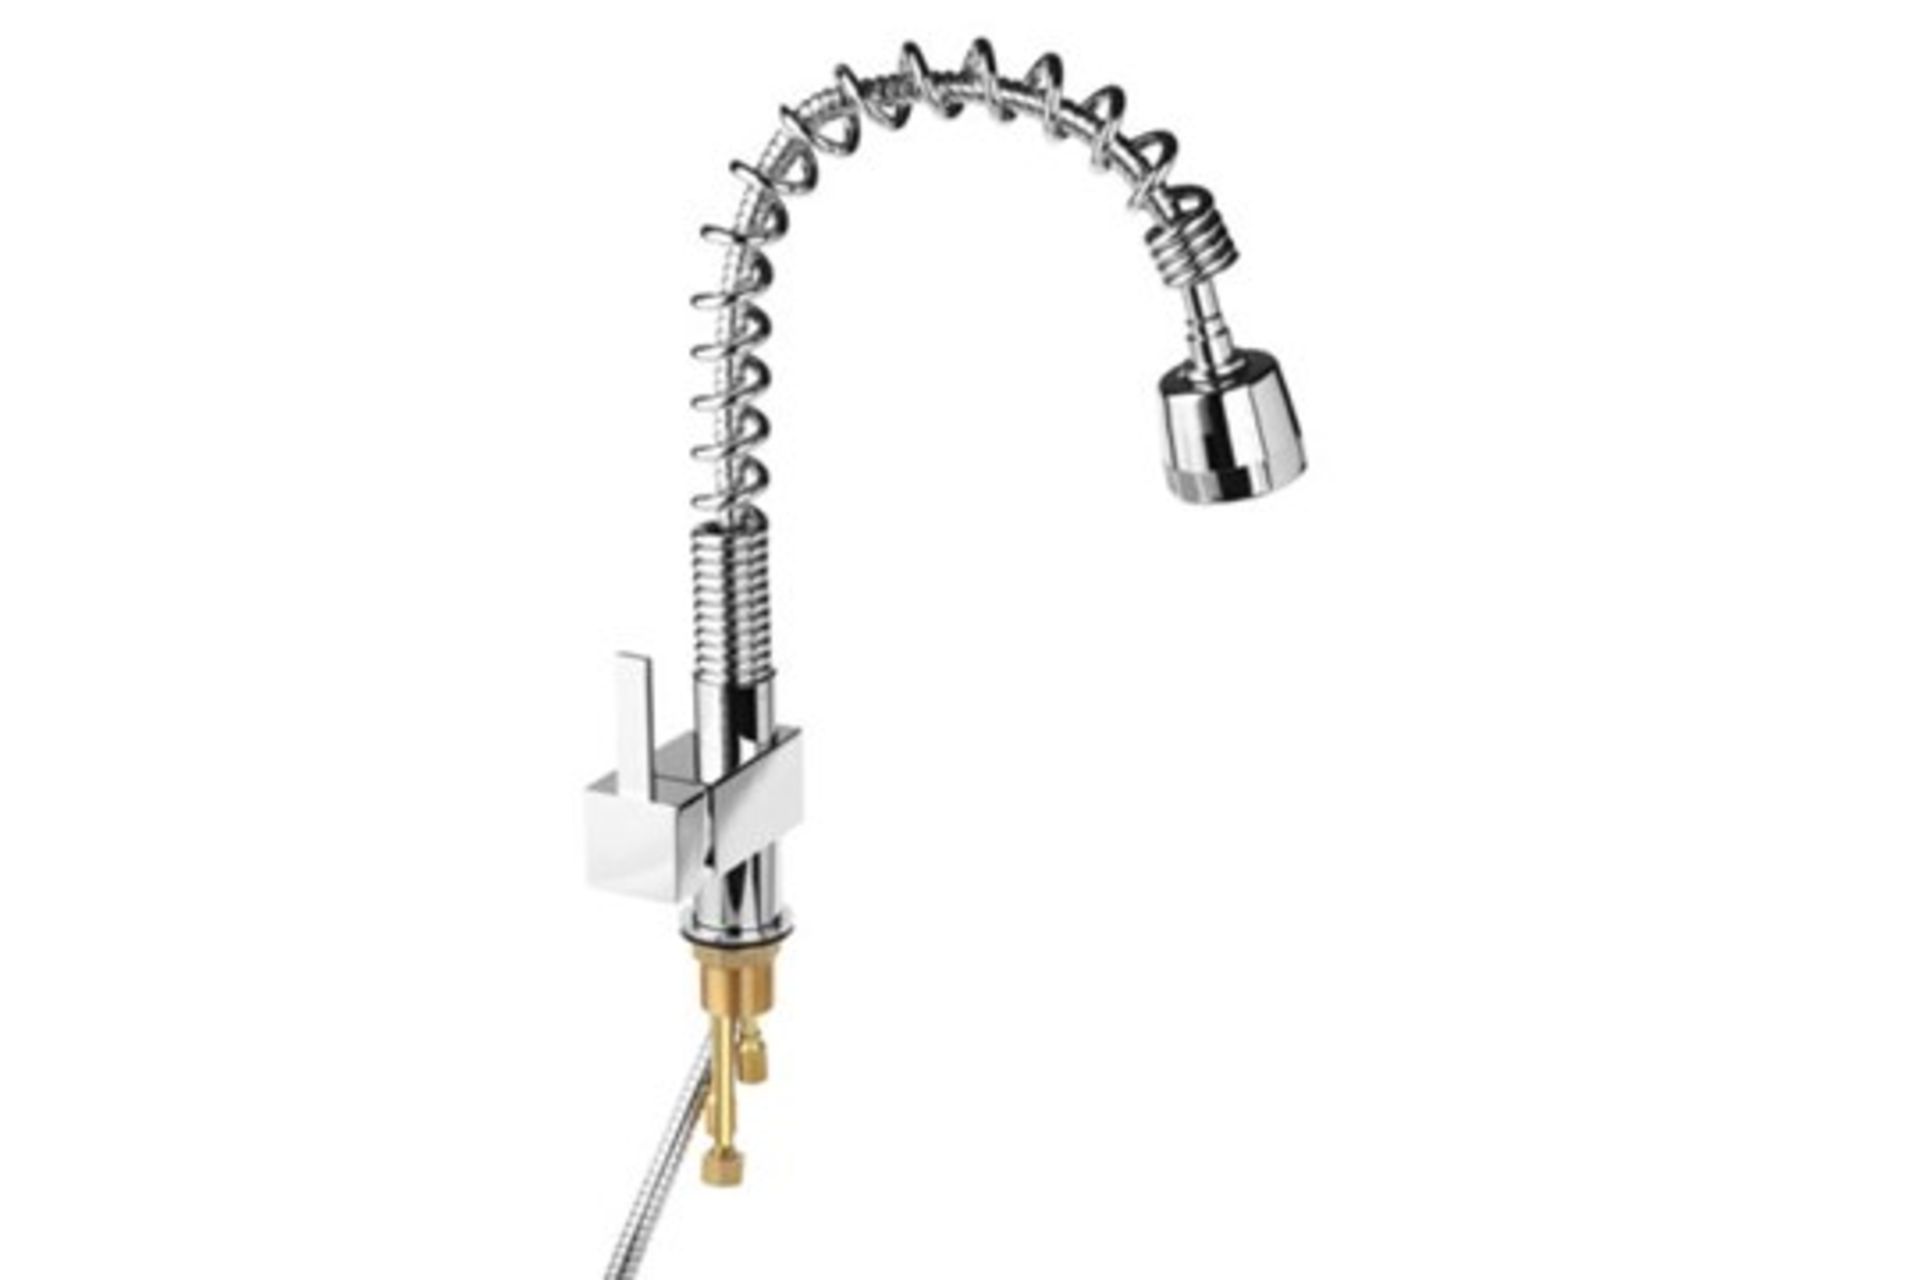 (CS212) Maddie Brushed Chrome Monobloc Kitchen Tap Swivel Pull Out Spray Mixer. RRP £219.99. - Image 2 of 2